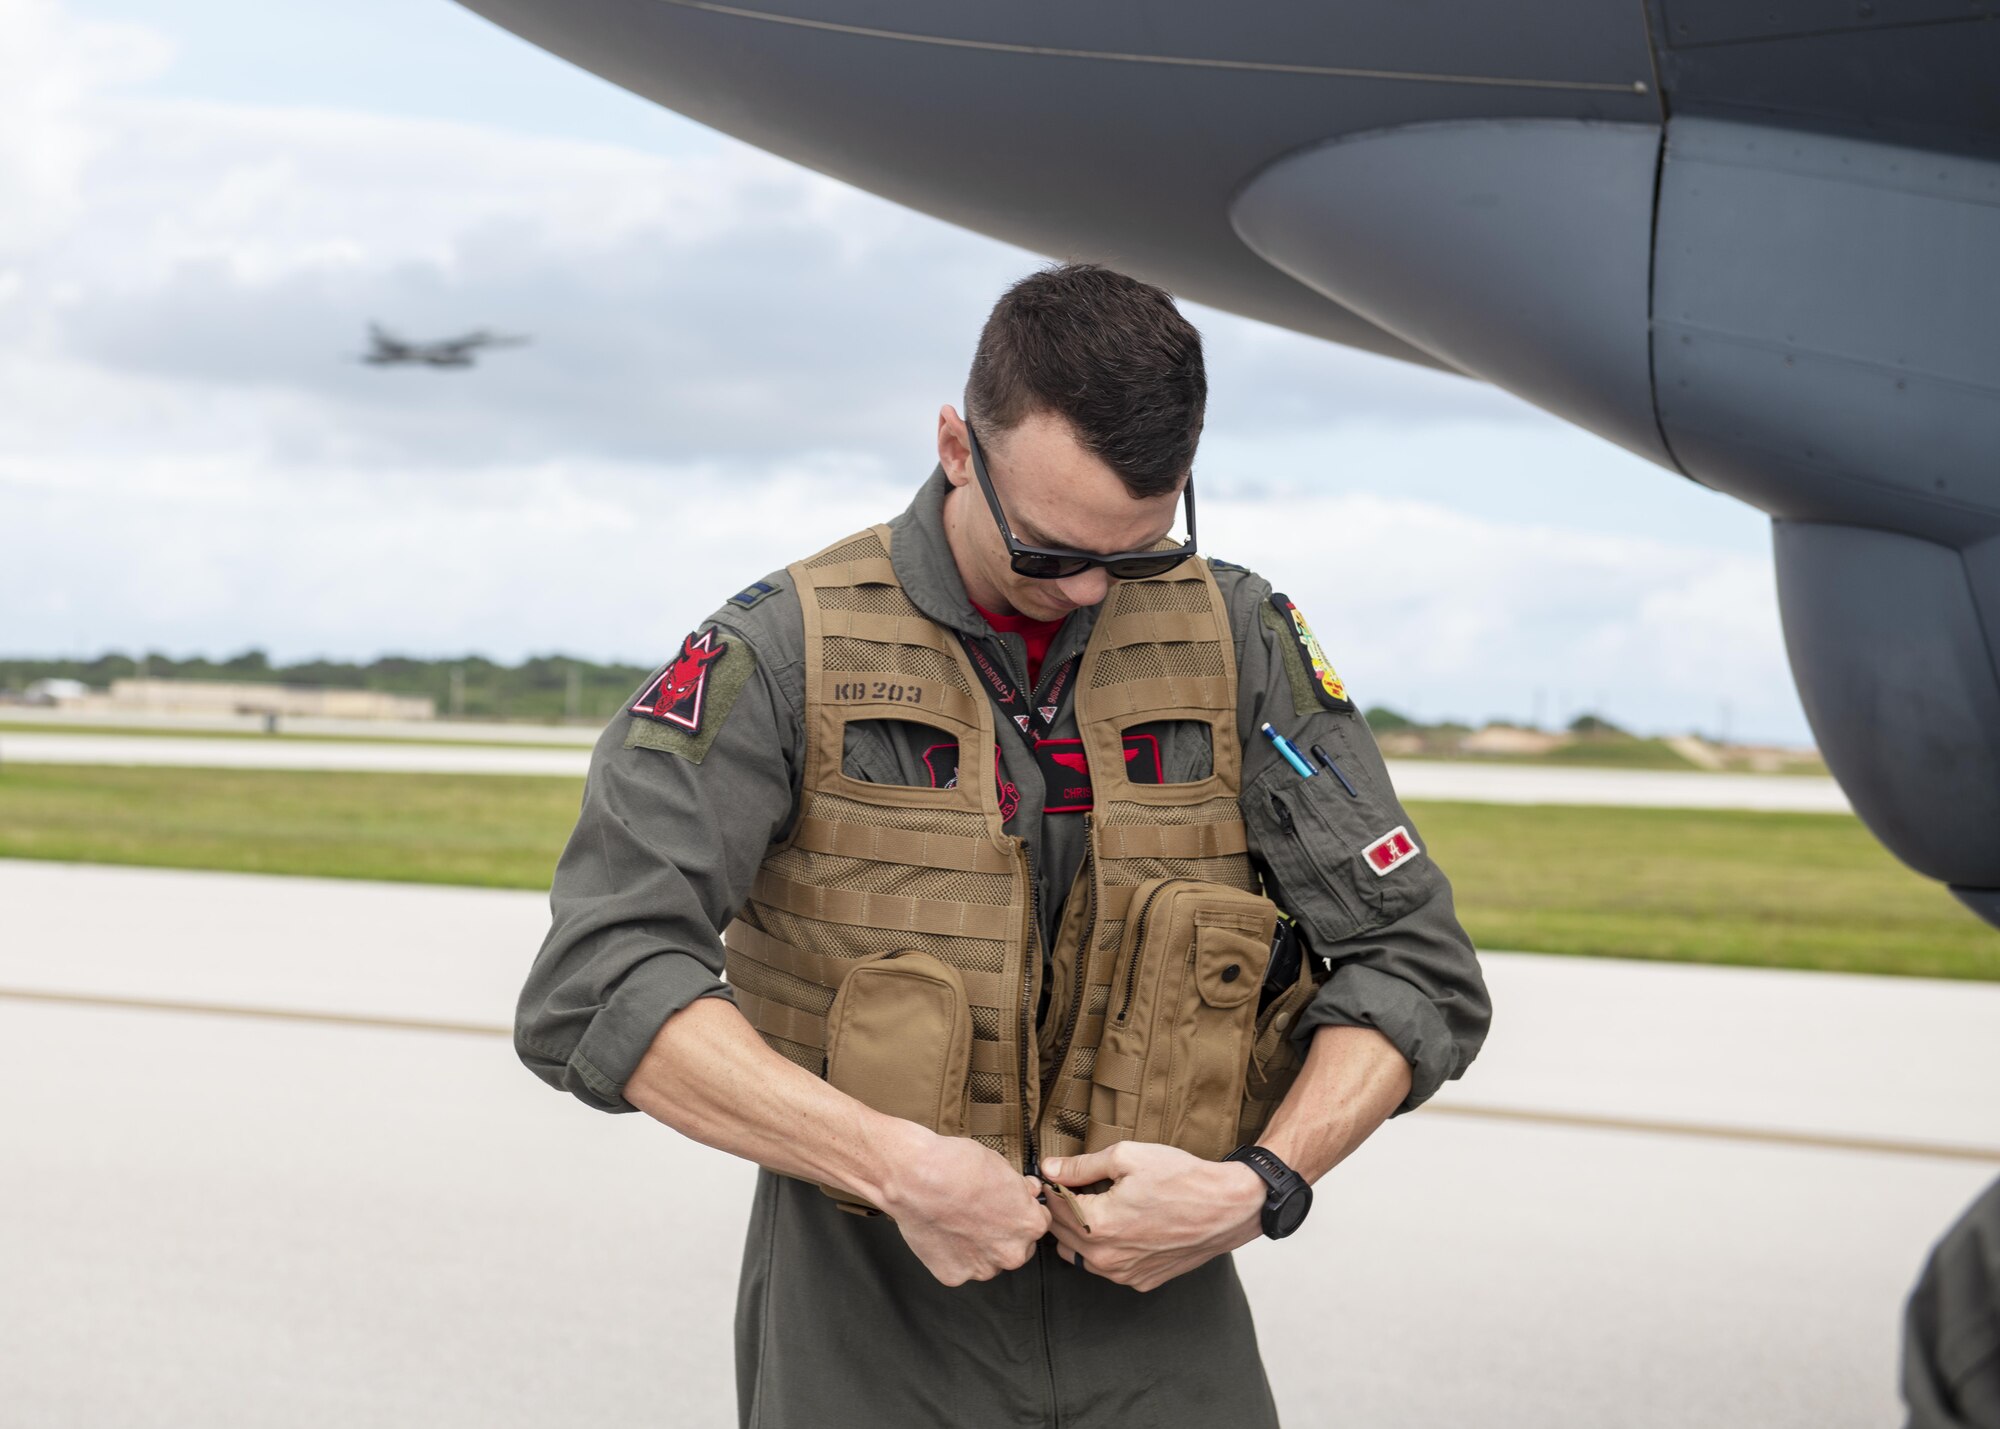 U.S. Air Force Capt. Chris Evelyn, 96th Expeditionary Bomb Squadron pilot, prepares to depart the flight line after arriving to Andersen Air Force Base, Guam, for a Bomber Task Force deployment, Feb. 11, 2022. The United States maintains a strong, credible bomber force that enhances the security and stability of allies and partners. BTF missions demonstrate lethality and interoperability in support of a free and open Indo-Pacific.  (U.S. Air Force photo by Staff Sgt. Lawrence Sena)